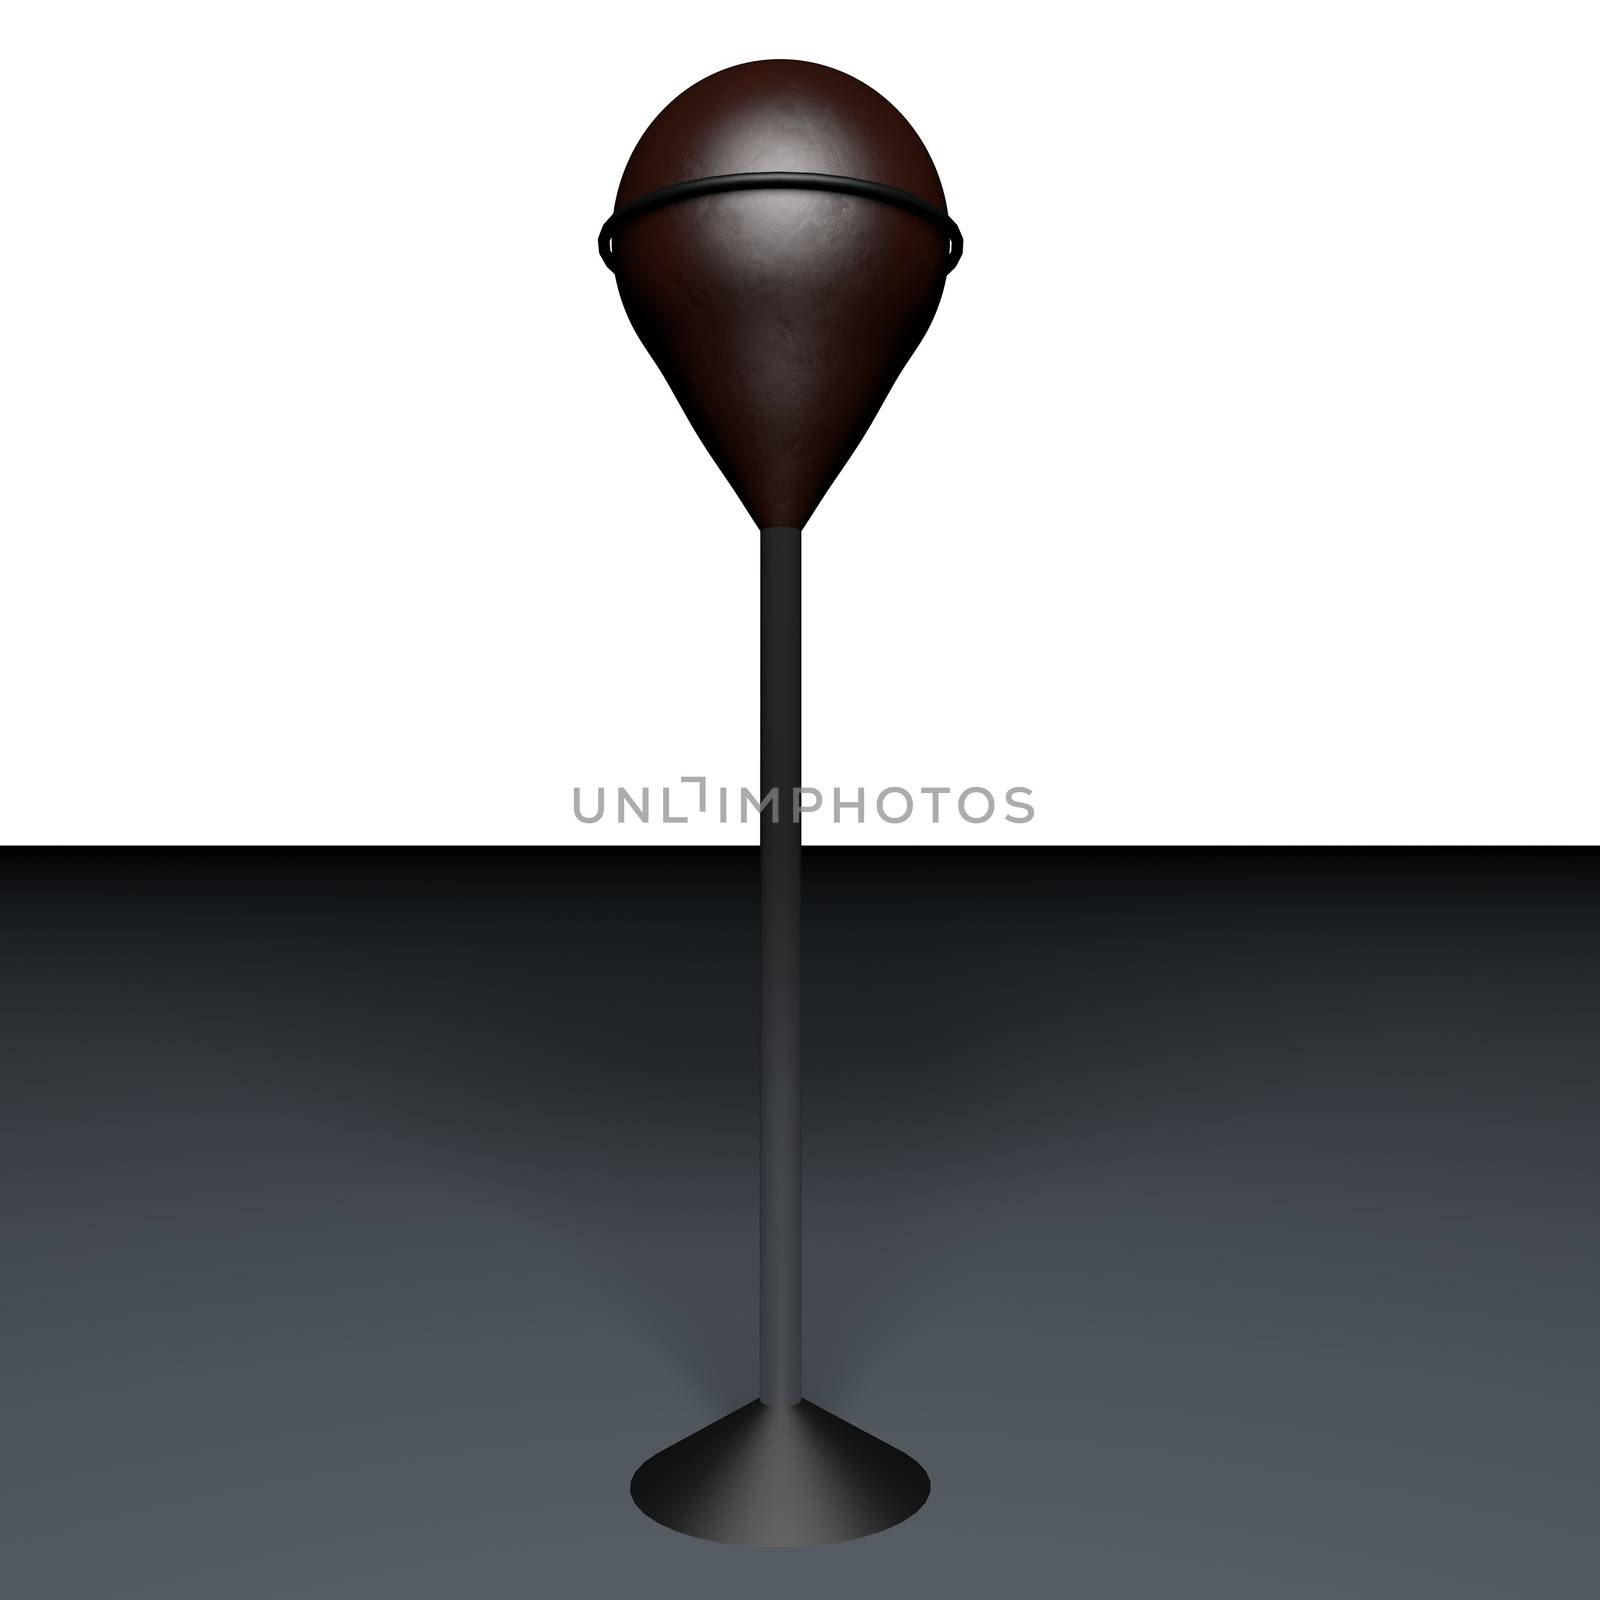 Punching ball over standing, 3d render, square image